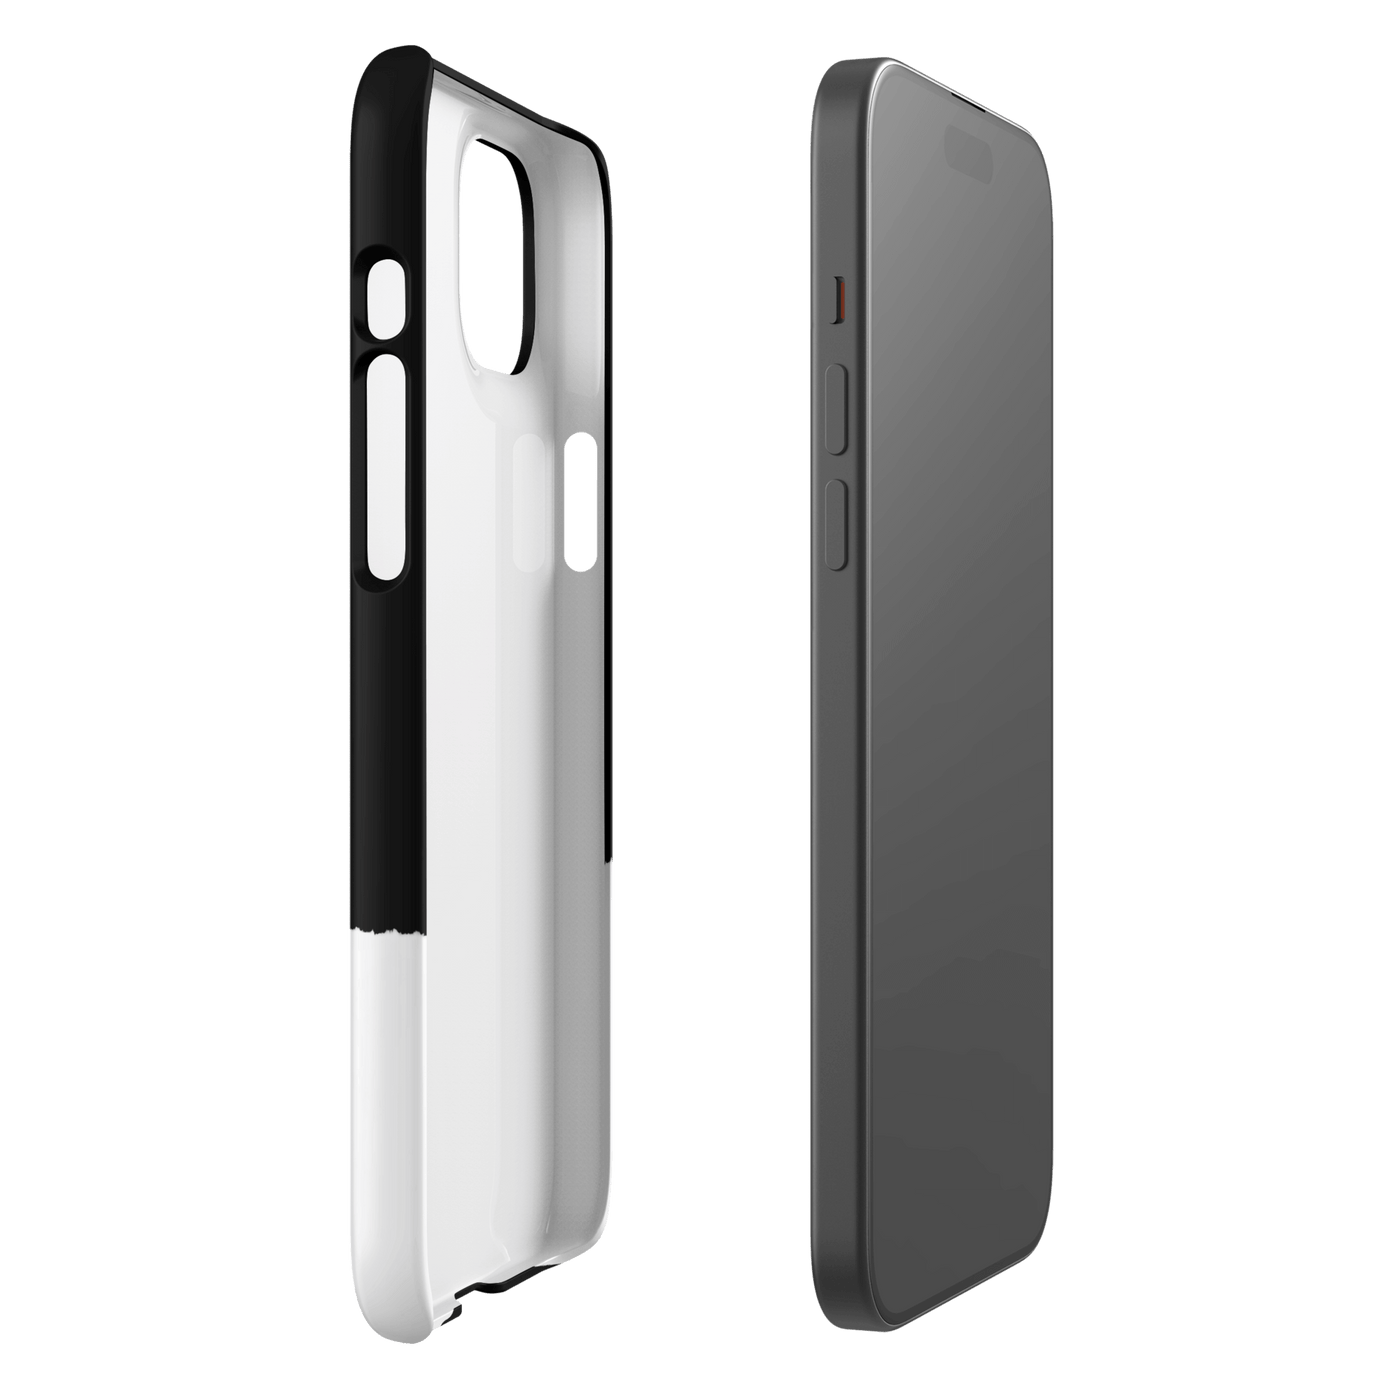 Snap Phone Case for iPhone® 15 | The Tough Level Up